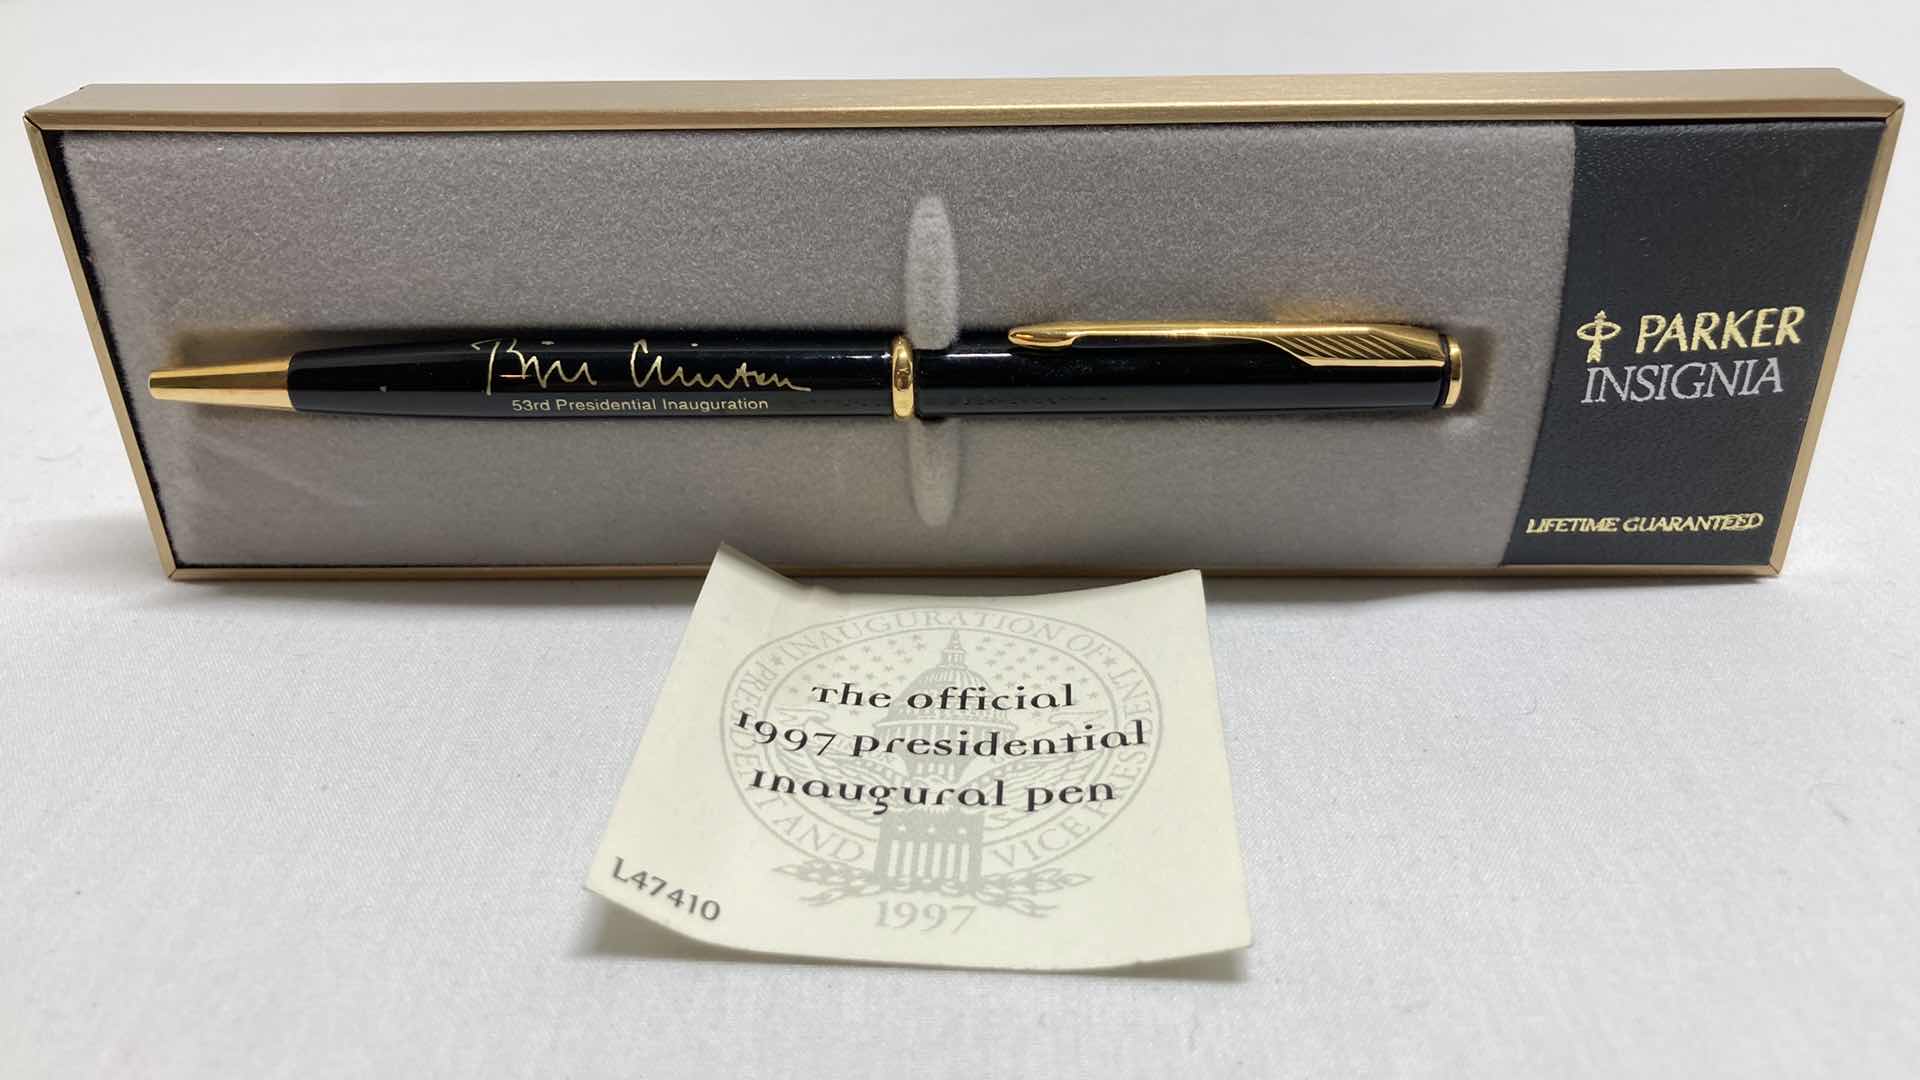 Photo 1 of PARKER INSIGNIA BILL CLINTON OFFICIAL 1997 53RD PRESIDENTIAL INAUGURATION PEN L47410